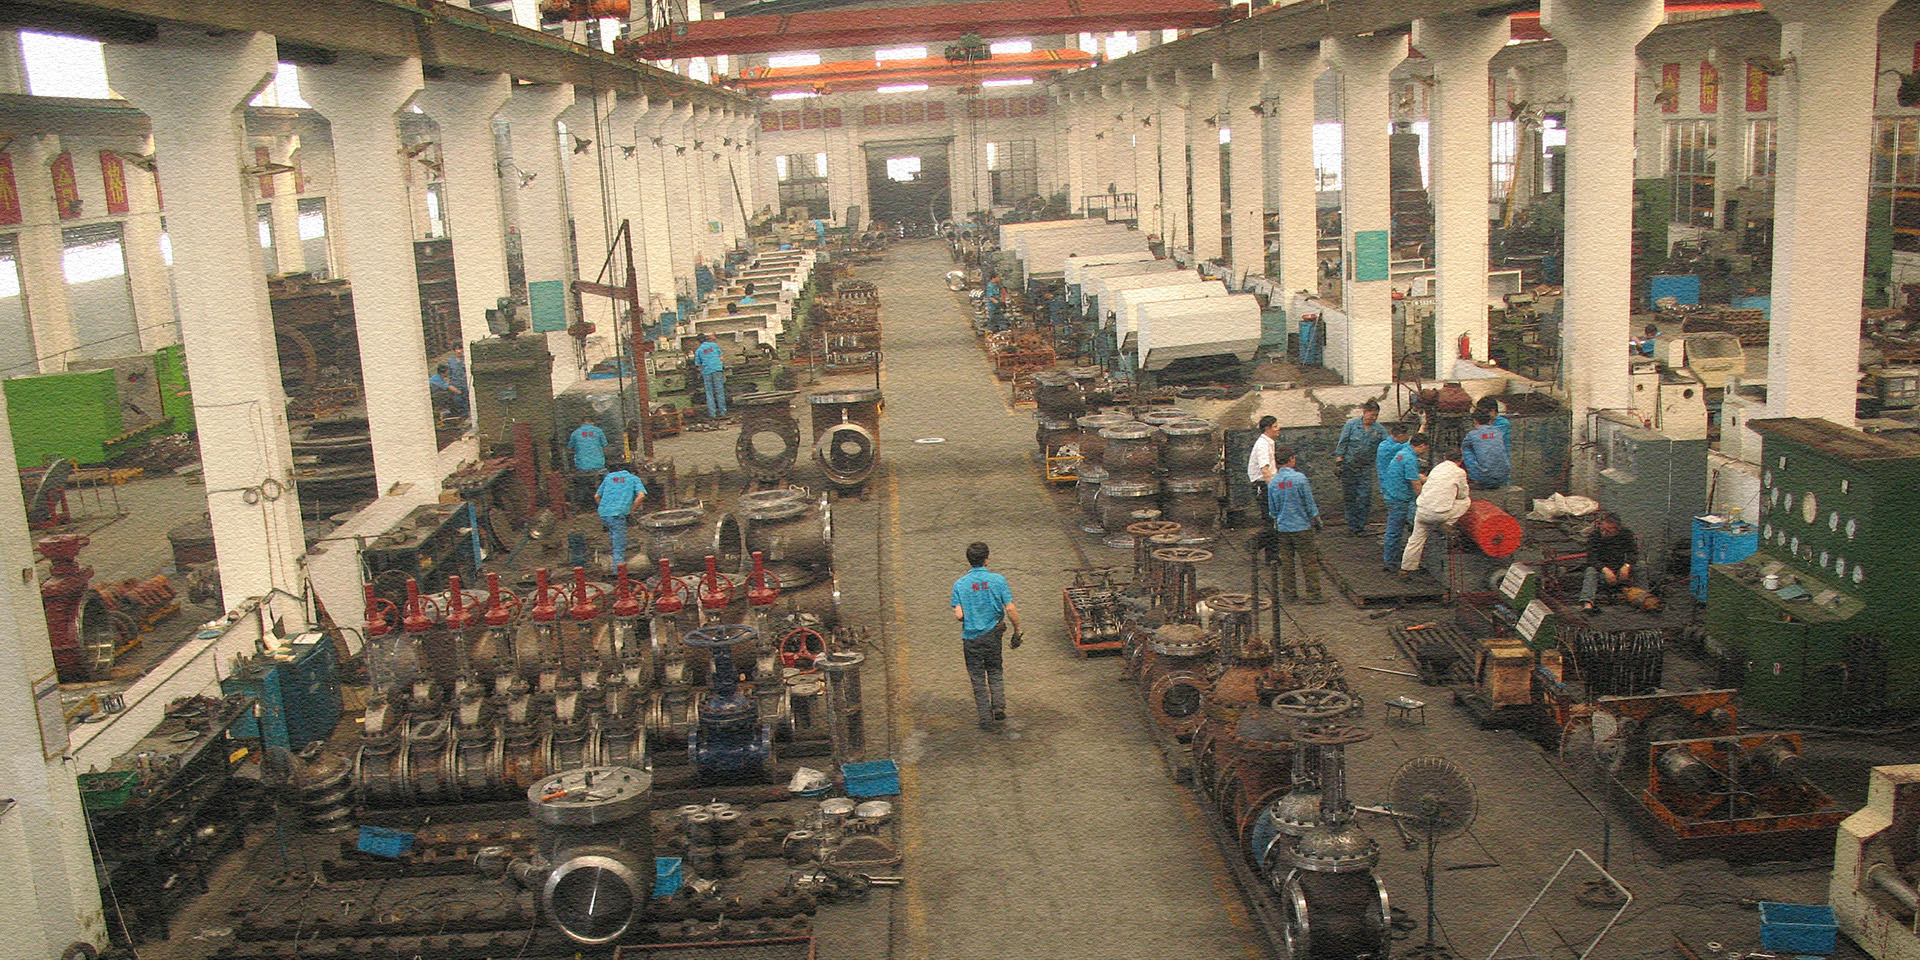 Songjiang manufacturing plant